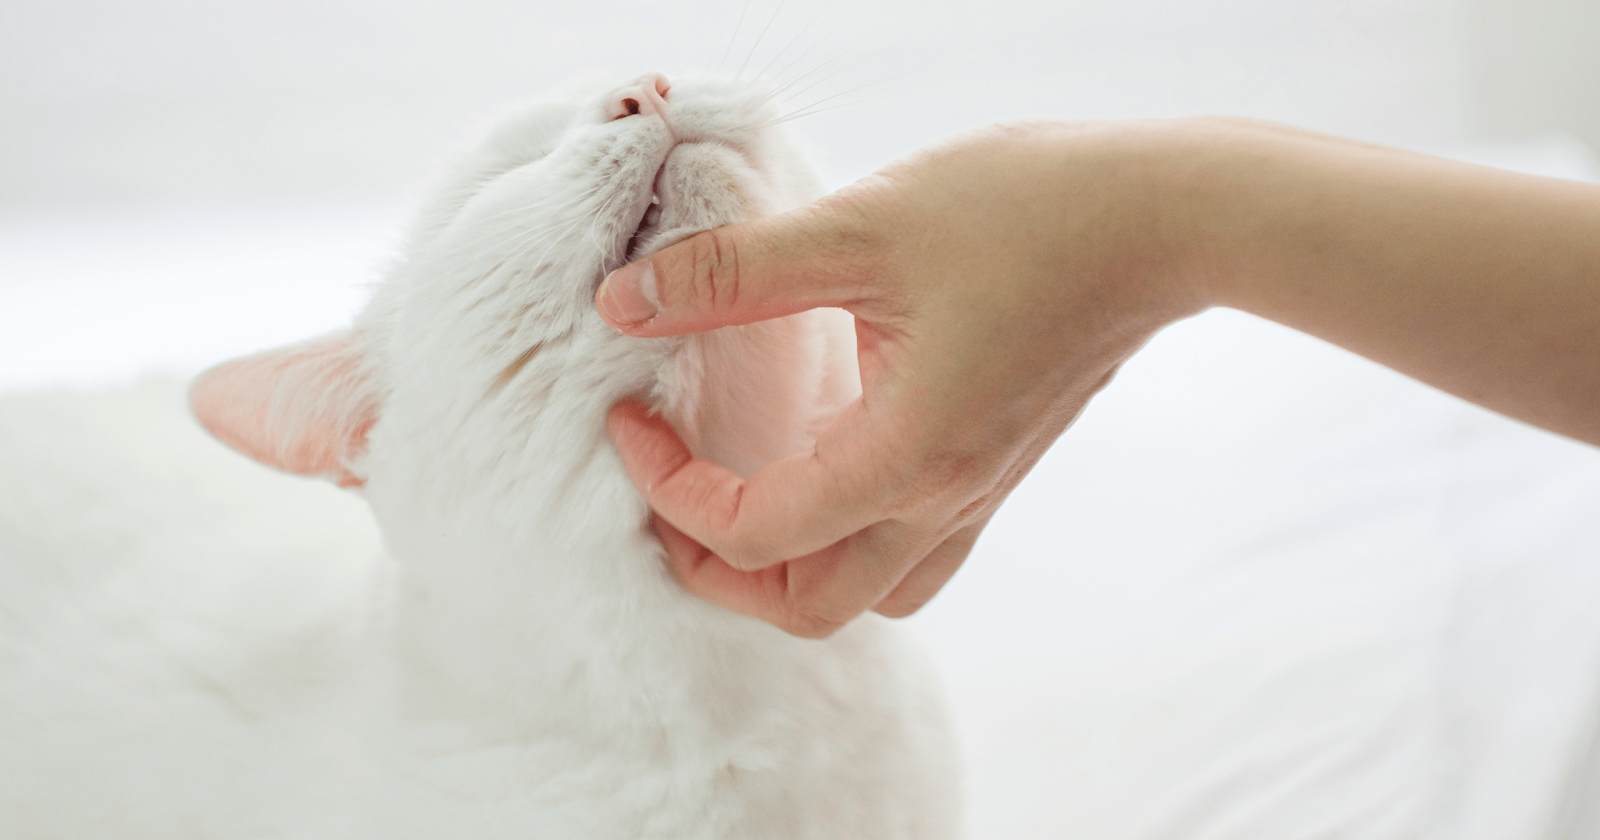 White cat receiving chin scratches